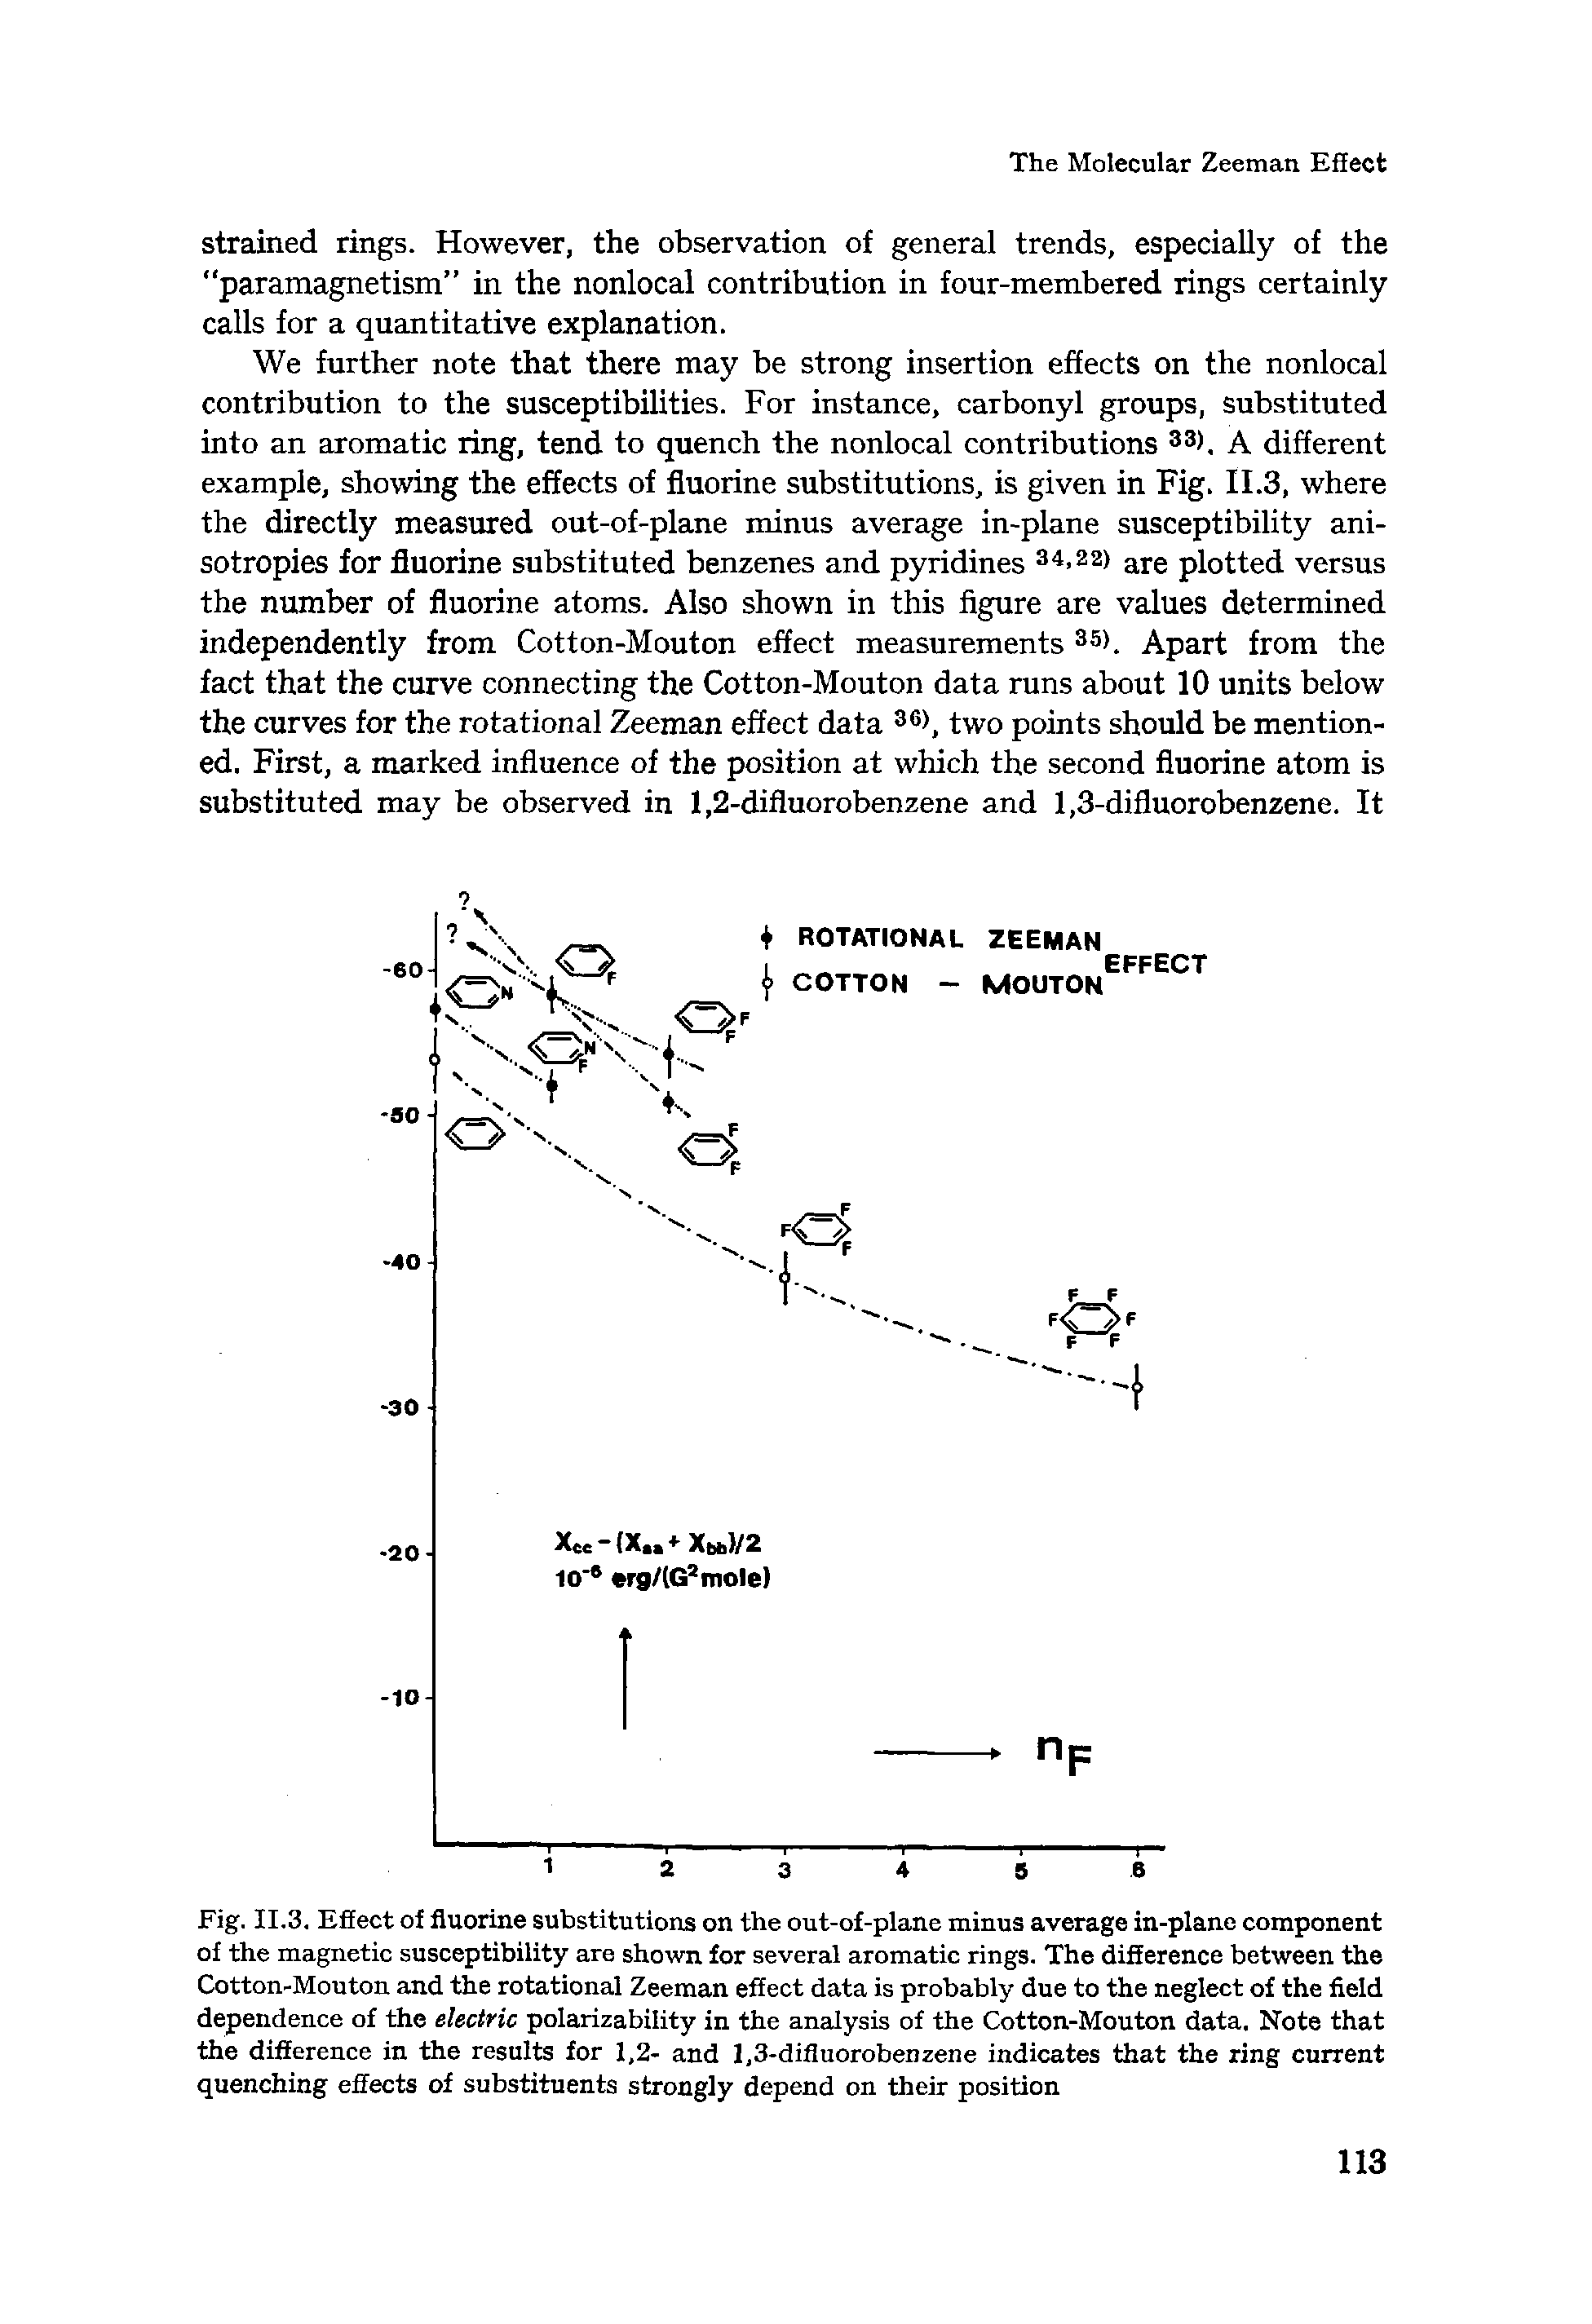 Fig. II.3. Effect of fluorine substitutions on the out-of-plane minus average in-plane component of the magnetic susceptibility are shown for several aromatic rings. The difference between the Cotton-Mouton and the rotational Zeeman effect data is probably due to the neglect of the field dependence of the electric polarizability in the analysis of the Cotton-Mouton data. Note that the difference in the results for 1,2- and 1,3-difluorobenzene indicates that the ring current quenching effects of substituents strongly depend on their position...